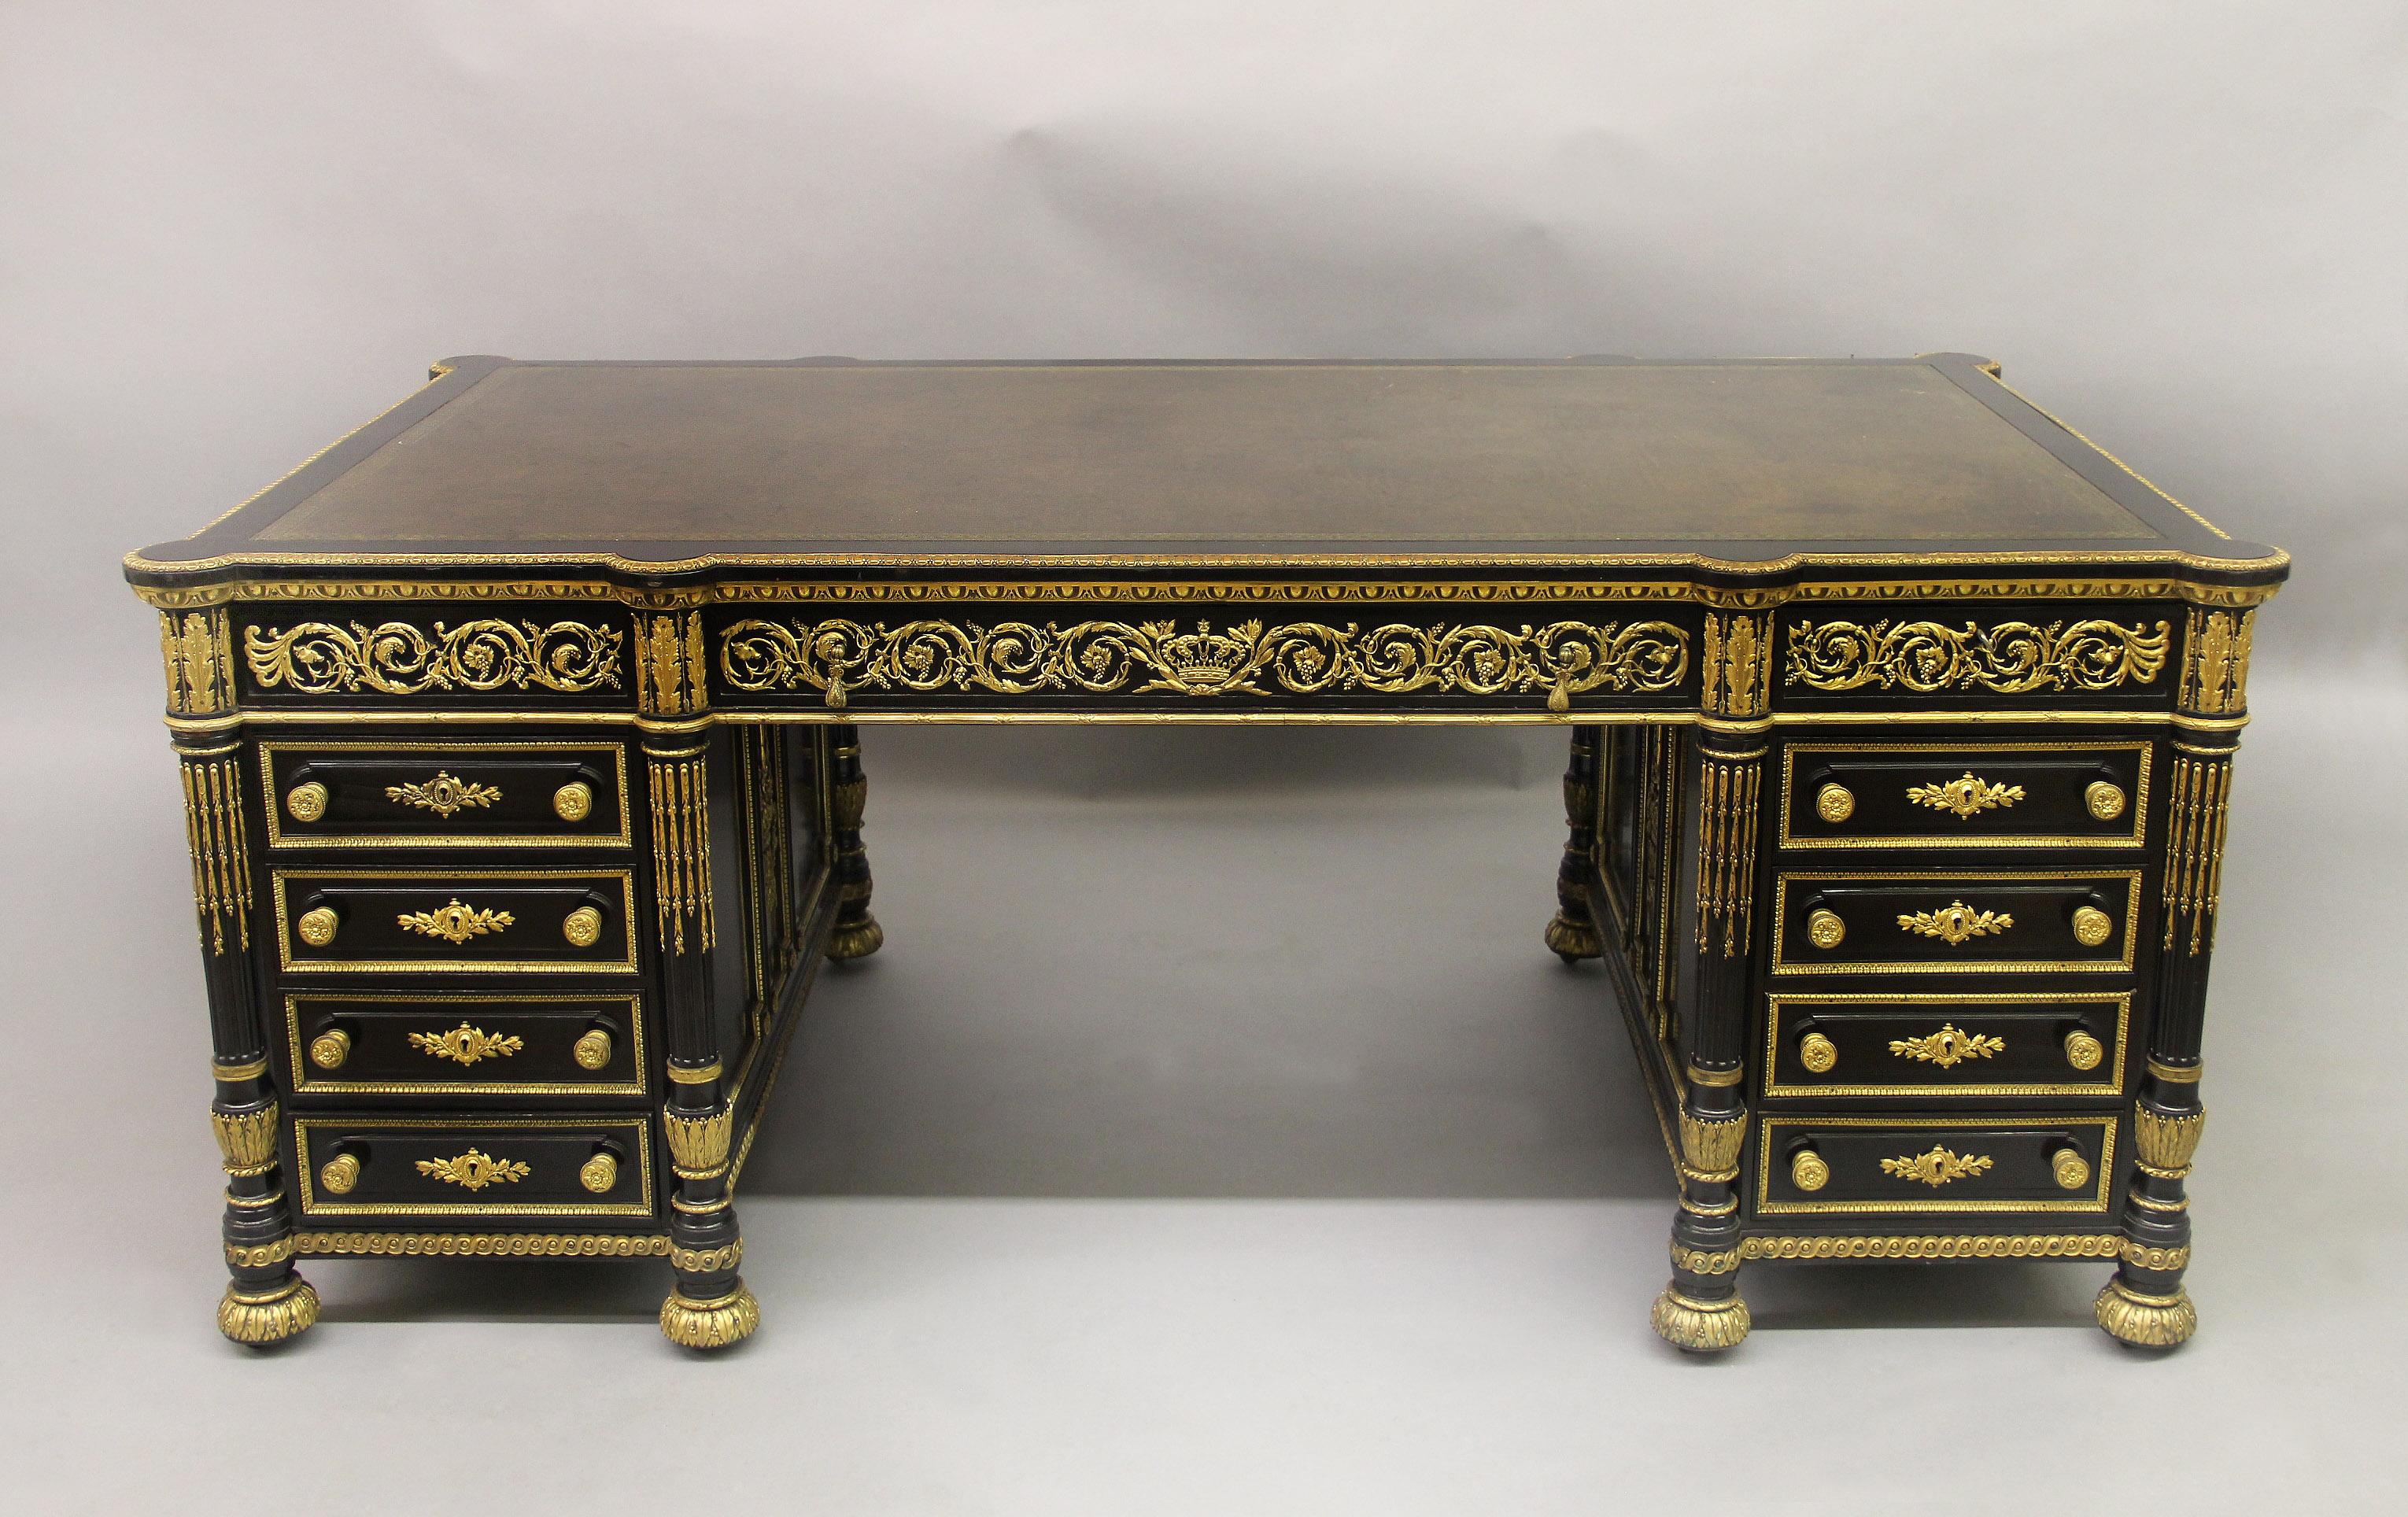 An exceptional and unusual 19th century Louis XVI style gilt bronze mounted English partners desk made for the French market

The rectangular top with gilt-tooled leather writing-surface within a molded border above a long central drawer designed